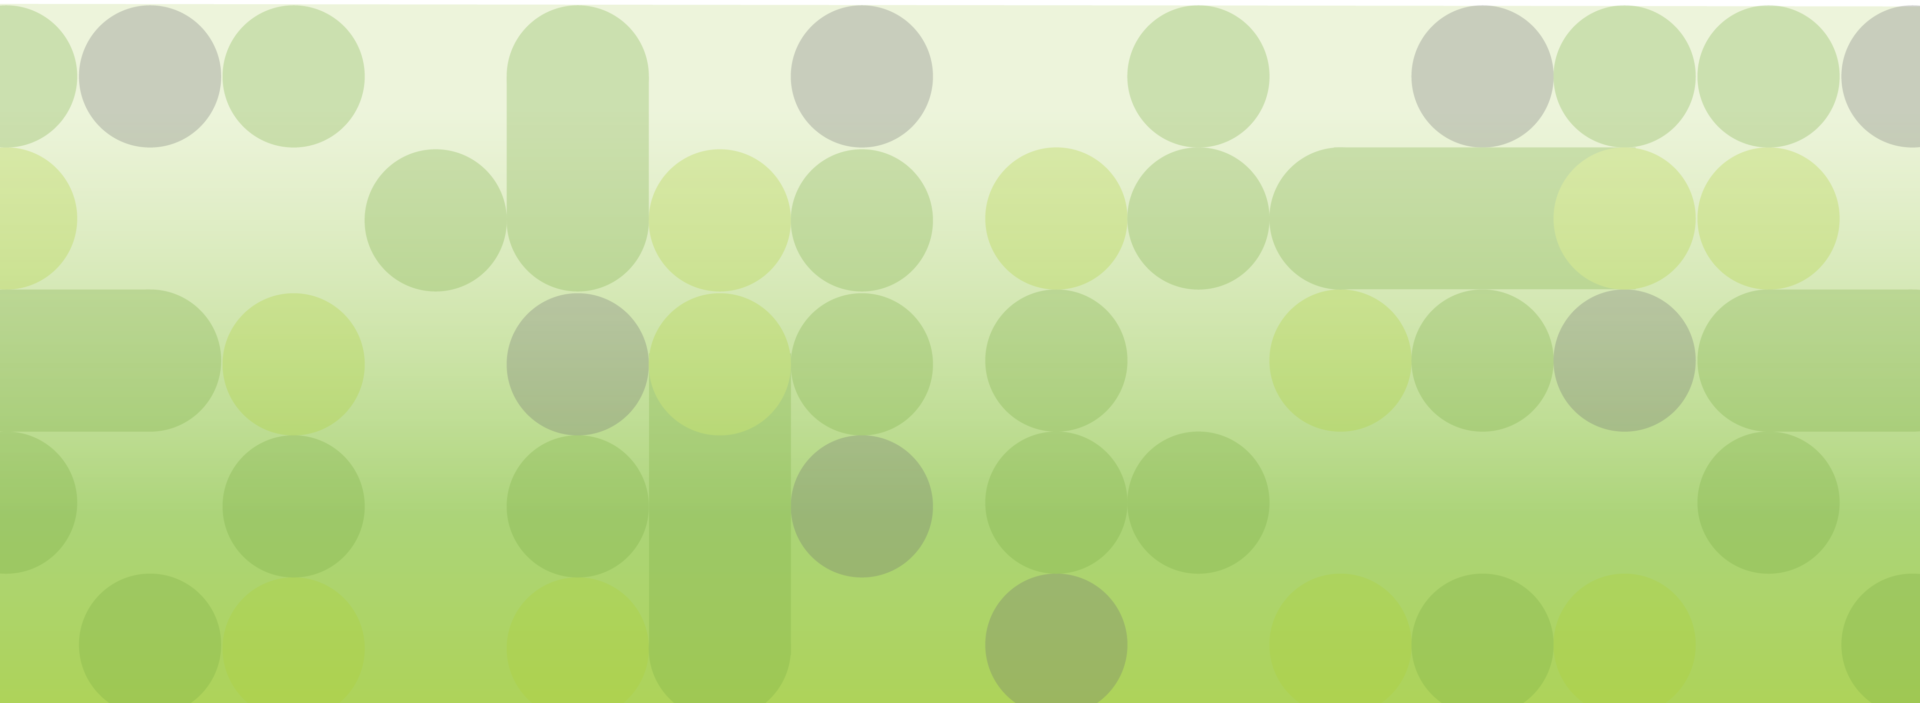 Decorative image with a green and gray circle pattern with green gradient overlay.